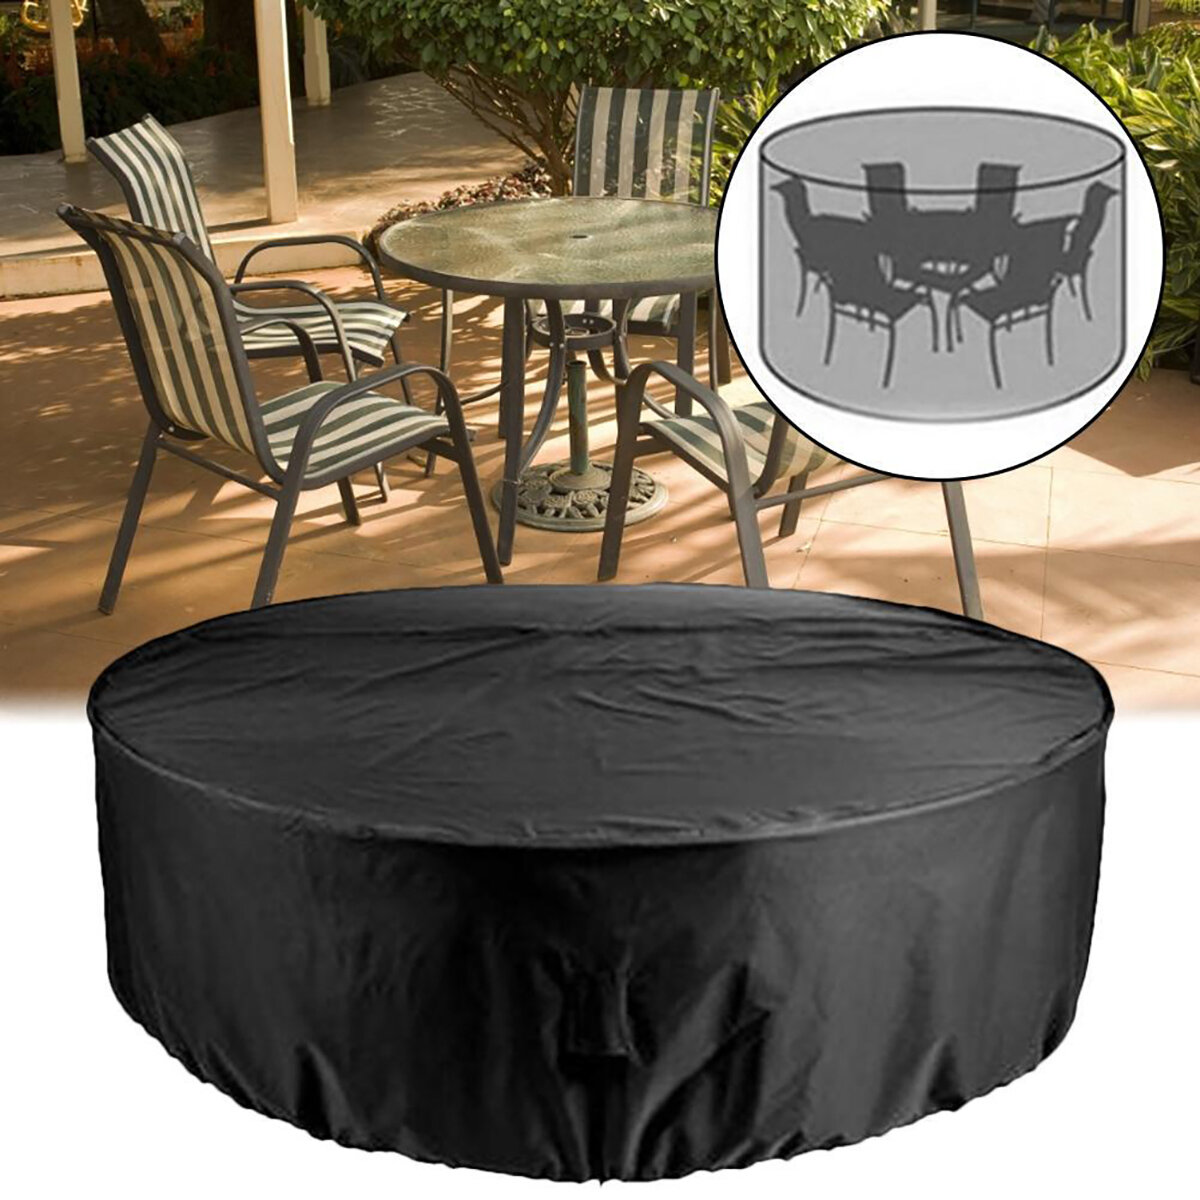 Round Chair Table Cover 210D Oxford Cloth Waterproof Dustproof Sofa Protector Outdoor Garden Furniture Cover